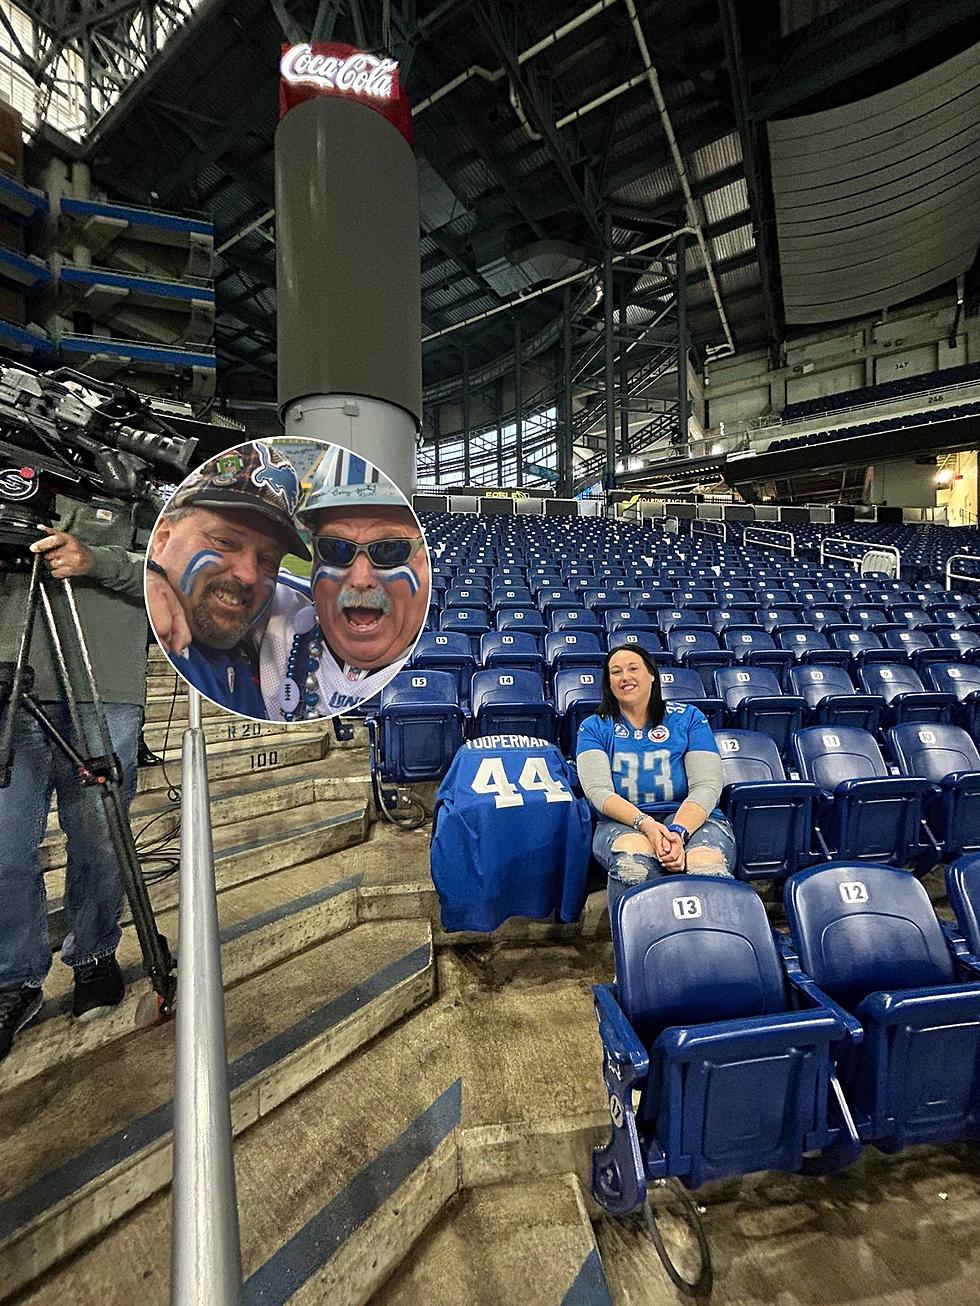 There Will Be Just One ‘Empty’ Seat at Ford Field Sunday Night